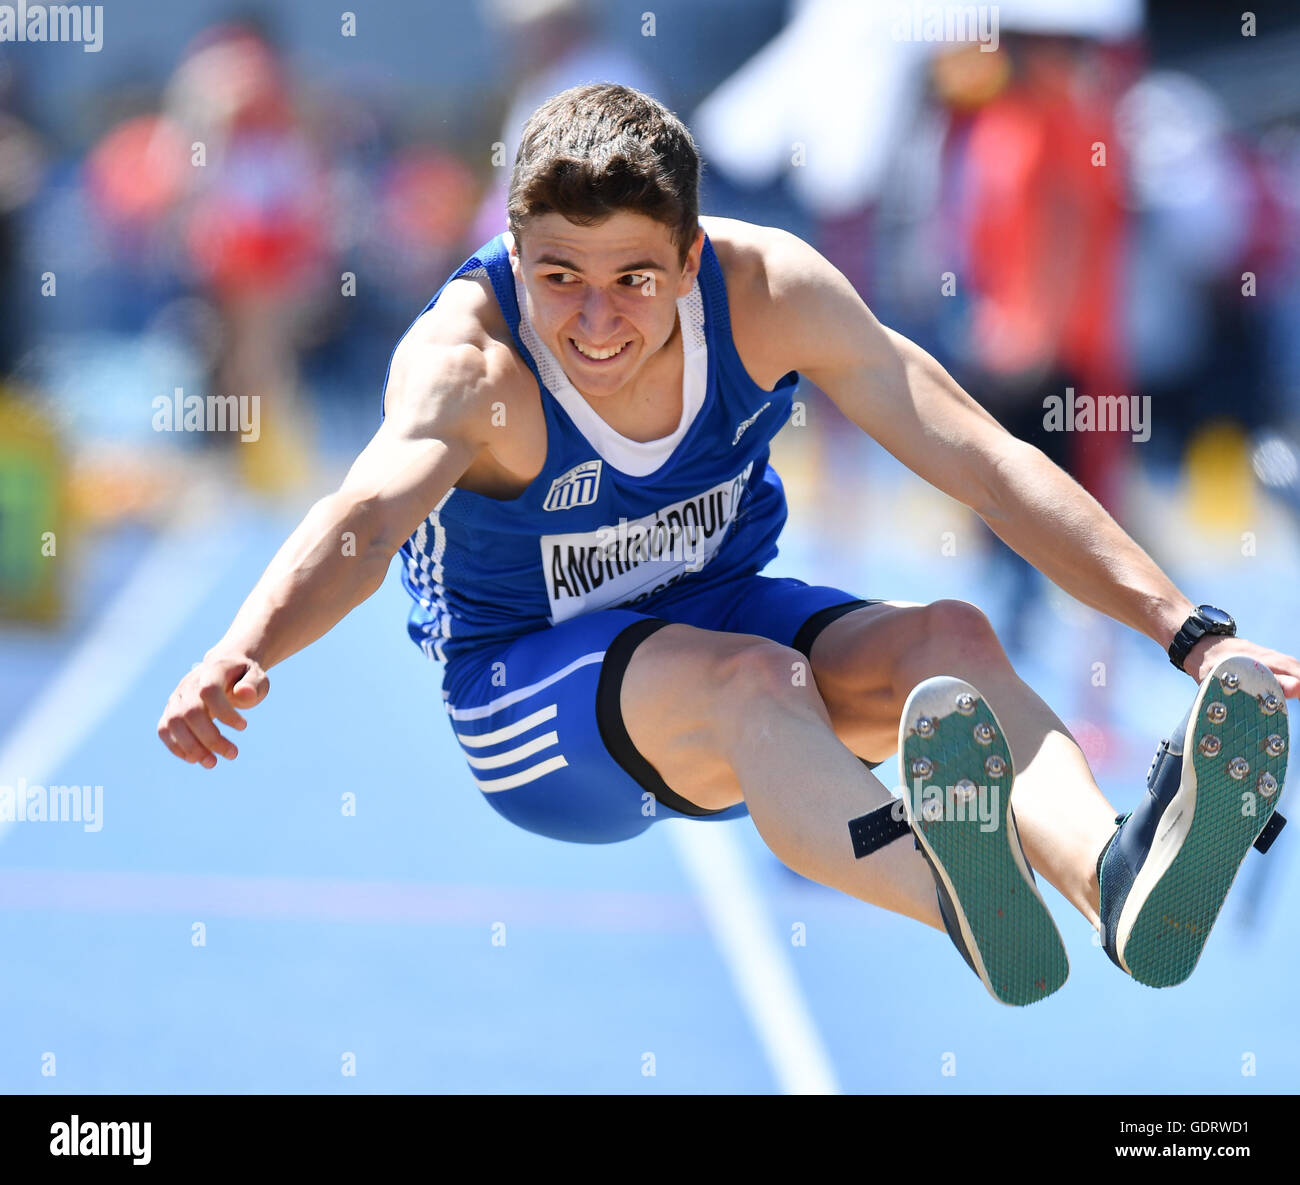 Bydgoszcz, Poland. 20th July, 2016. Nikolaos Andrikopoulos of Greece in the  qualification round of the mens triple jump during the morning session on  day 2 of the IAAF World Junior Championships at